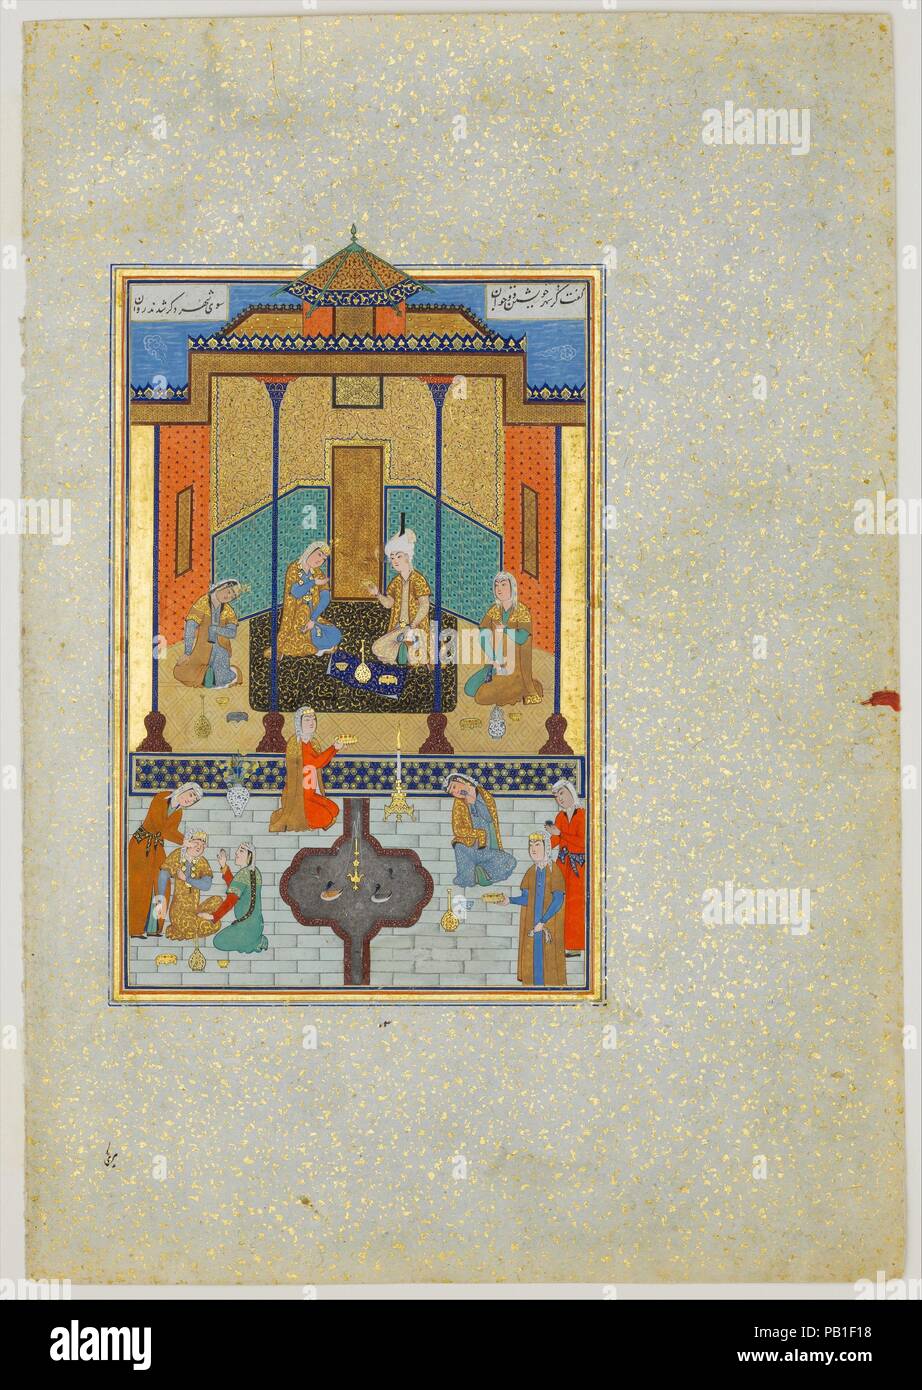 'Bahram Gur in the Sandal Palace on Thursday', Folio 230 from a Khamsa (Quintet) of Nizami. Artist: Painting by Shaikh Zada. Author: Nizami (Ilyas Abu Muhammad Nizam al-Din of Ganja) (probably 1141-1217). Calligrapher: Sultan Muhammad Nur (ca. 1472-ca. 1536). Dimensions: Painting: H. 7 13/16 in. (19.8 cm)   W. 4 5/8 in. (11.7 cm)  Page: H. 12 5/8 in. (32.1 cm)   W. 8 3/4 in. (22.2 cm)  Mat: H. 19 1/4 in. (48.9 cm)   W. 14 1/4 in. (36.2 cm). Date: A.H. 931/A.D. 1524-25.  The Haft Paikar (Seven Portraits) is one of the five poems of the Khamsa of Nizami.  The poetry is mystical, illustrating the Stock Photo